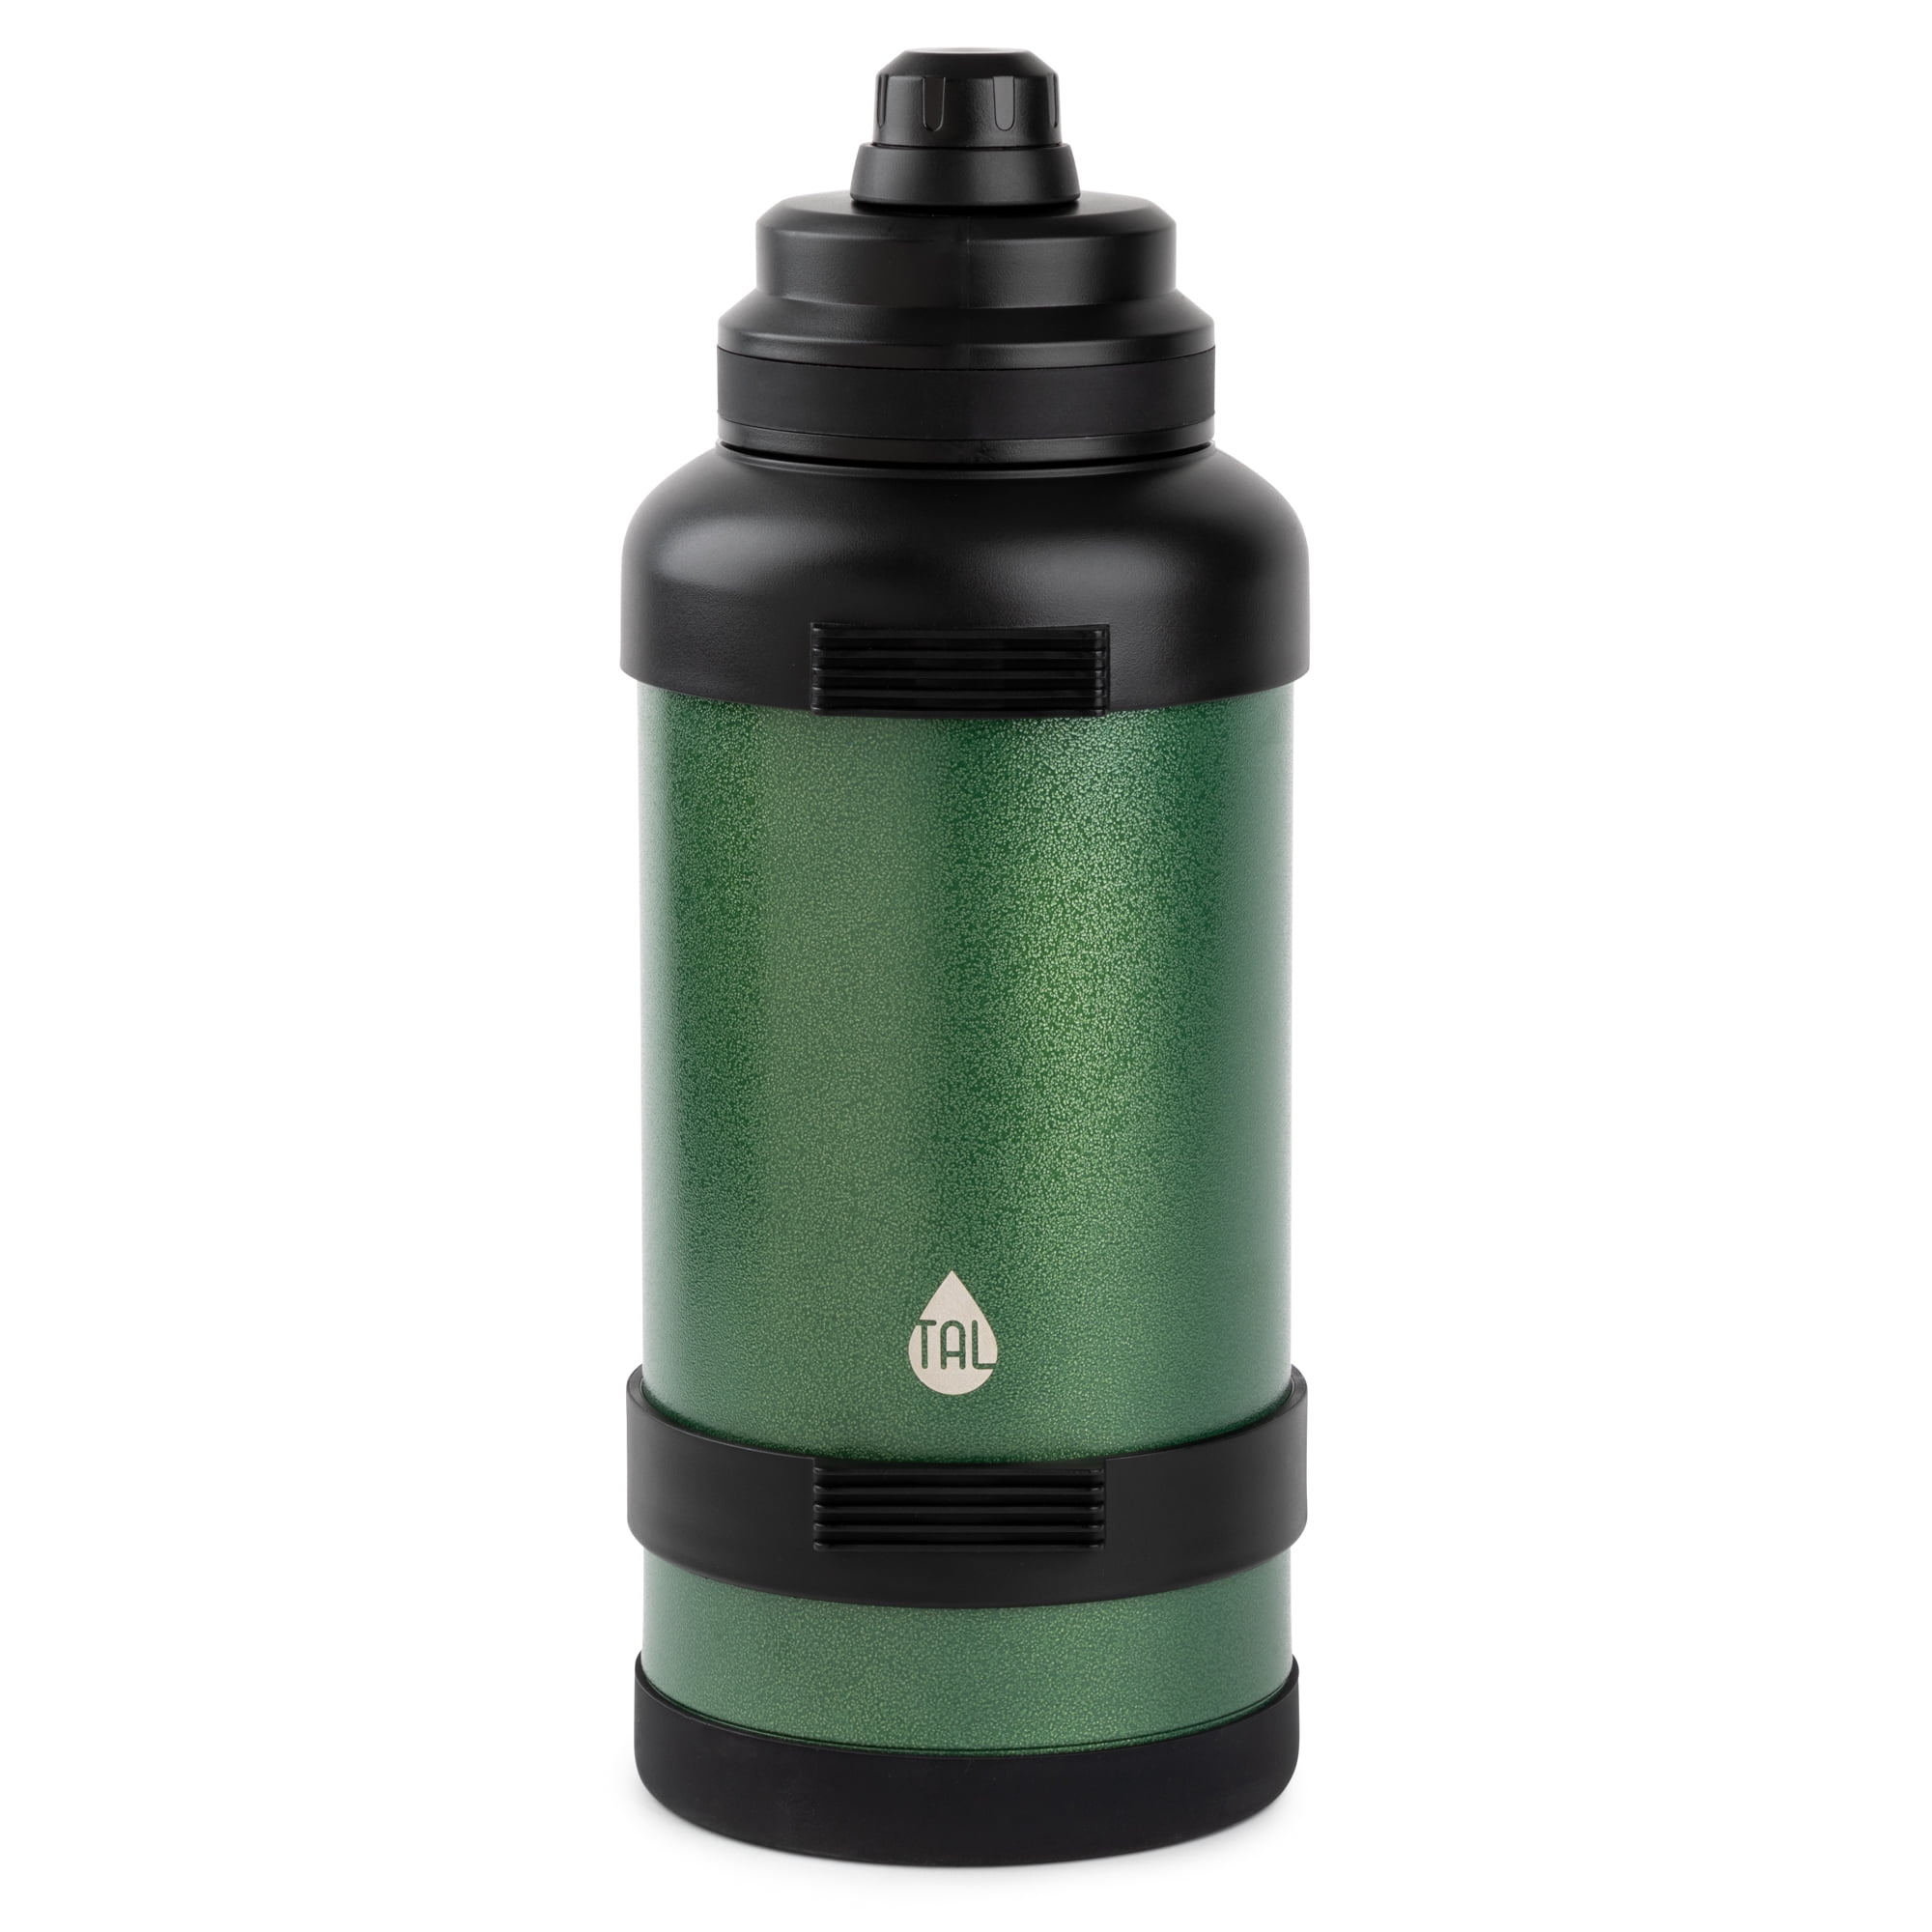 Where can I buy a replacement lid for this TAL 64oz water bottle :  r/wherecanibuythis